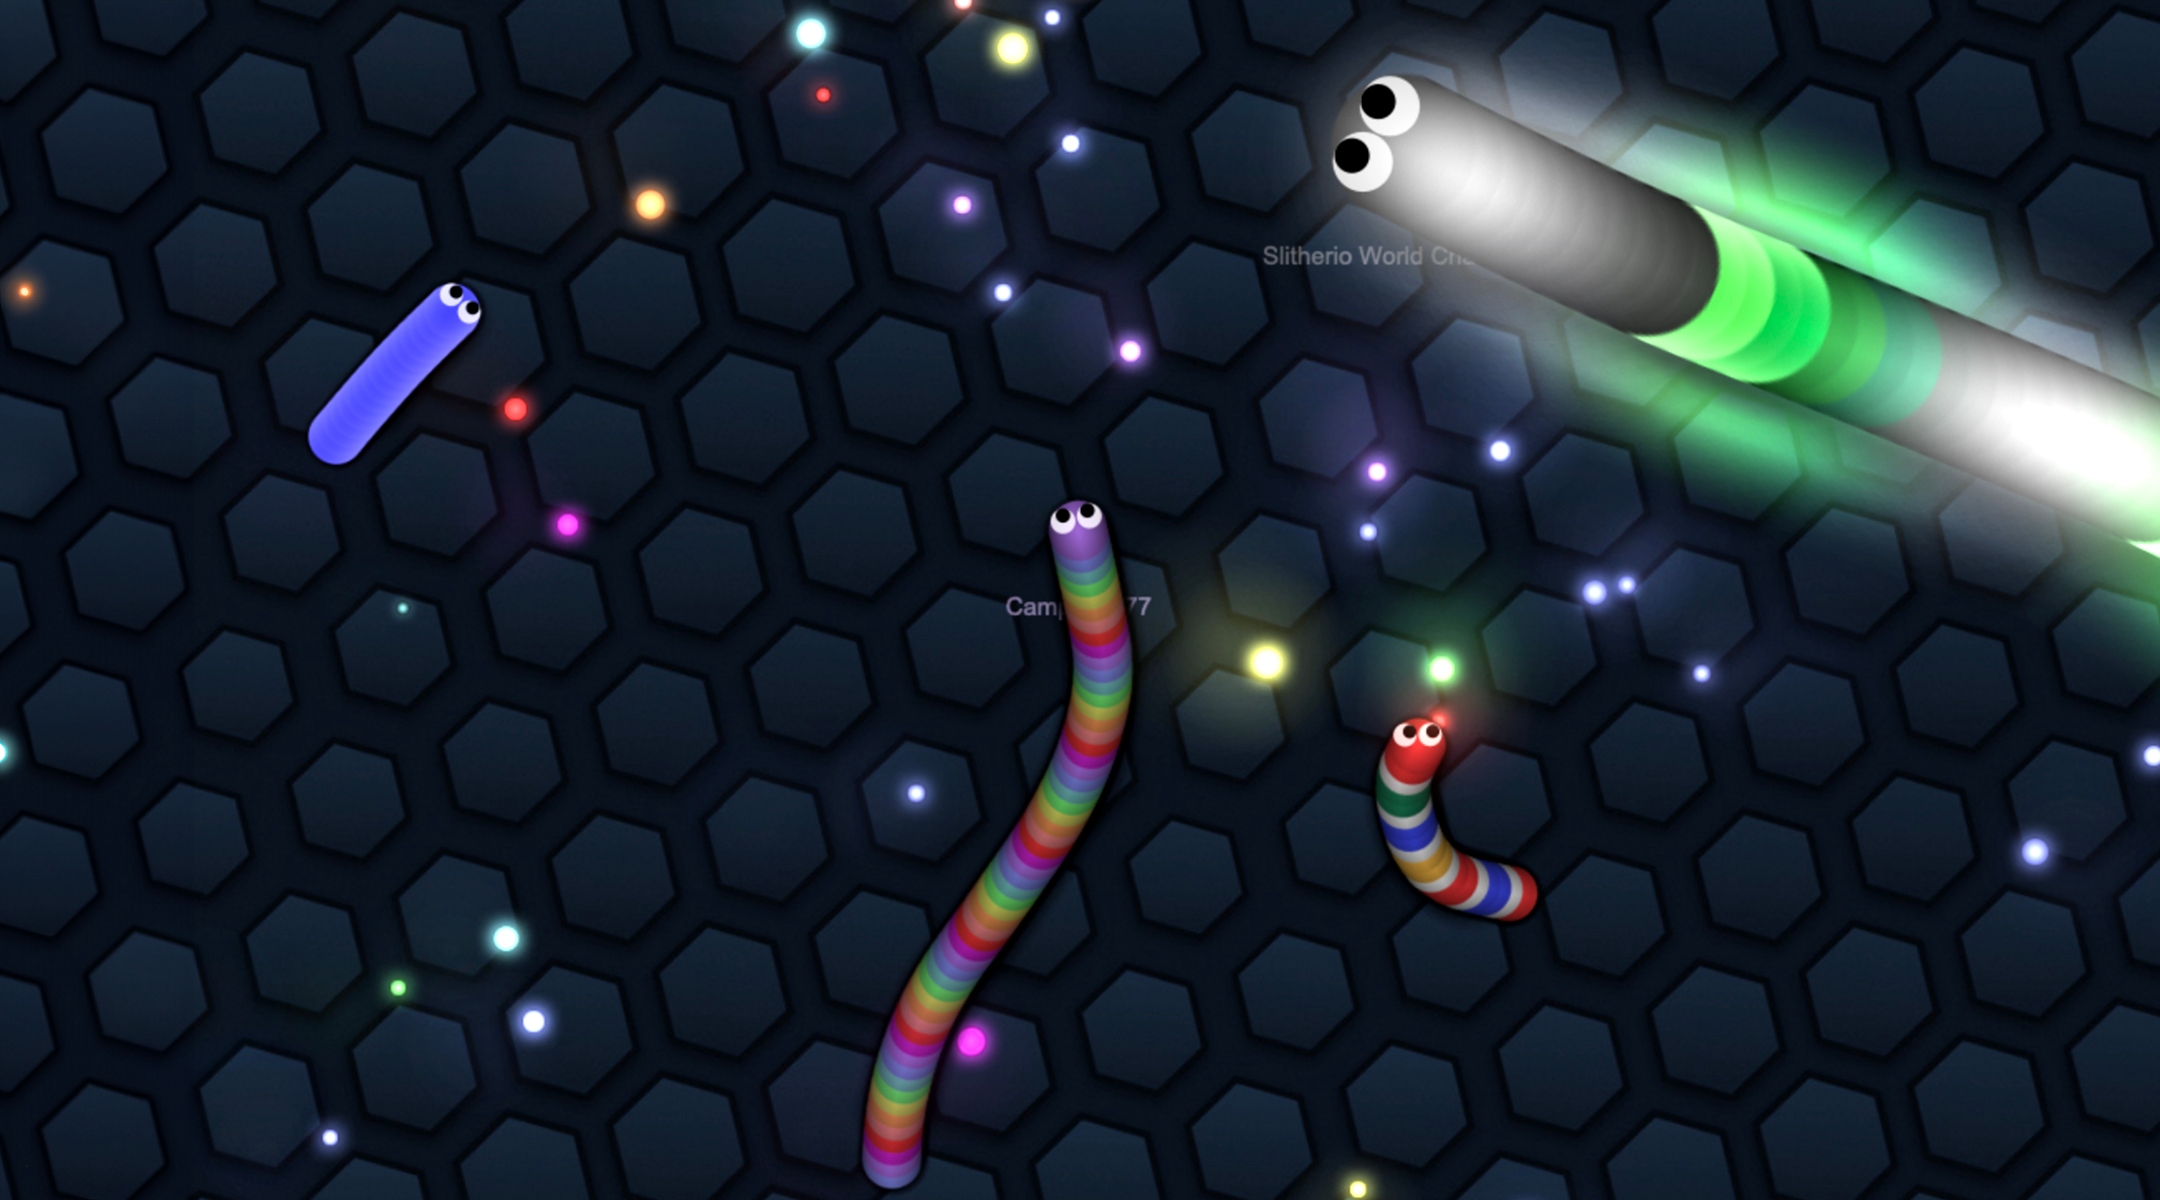 Slither.io, my favorite online video game, is letting antisemitism spoil the fun